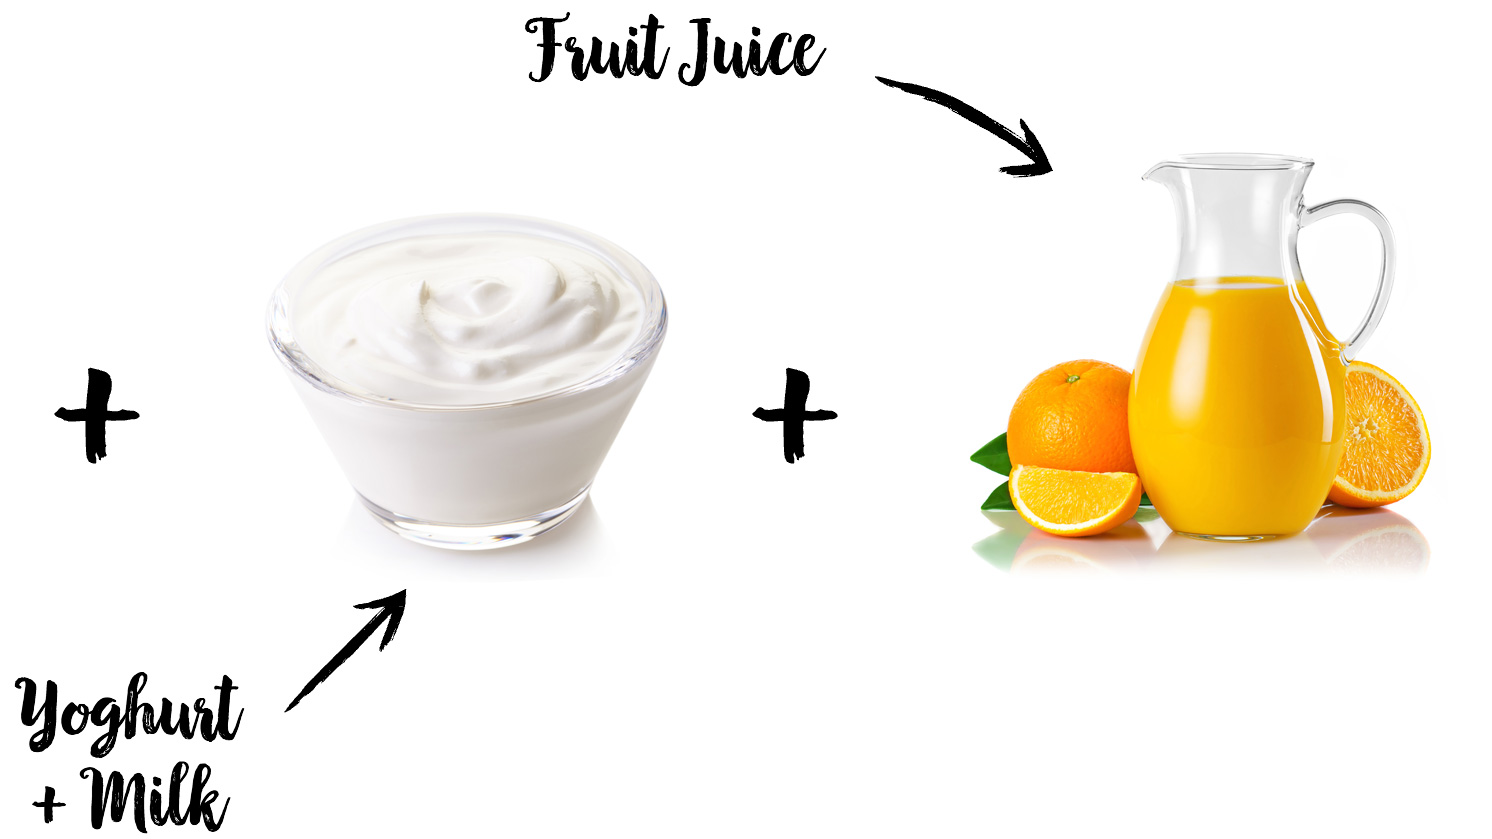 graphic displaying a bowl of yoghurt and fruit juice